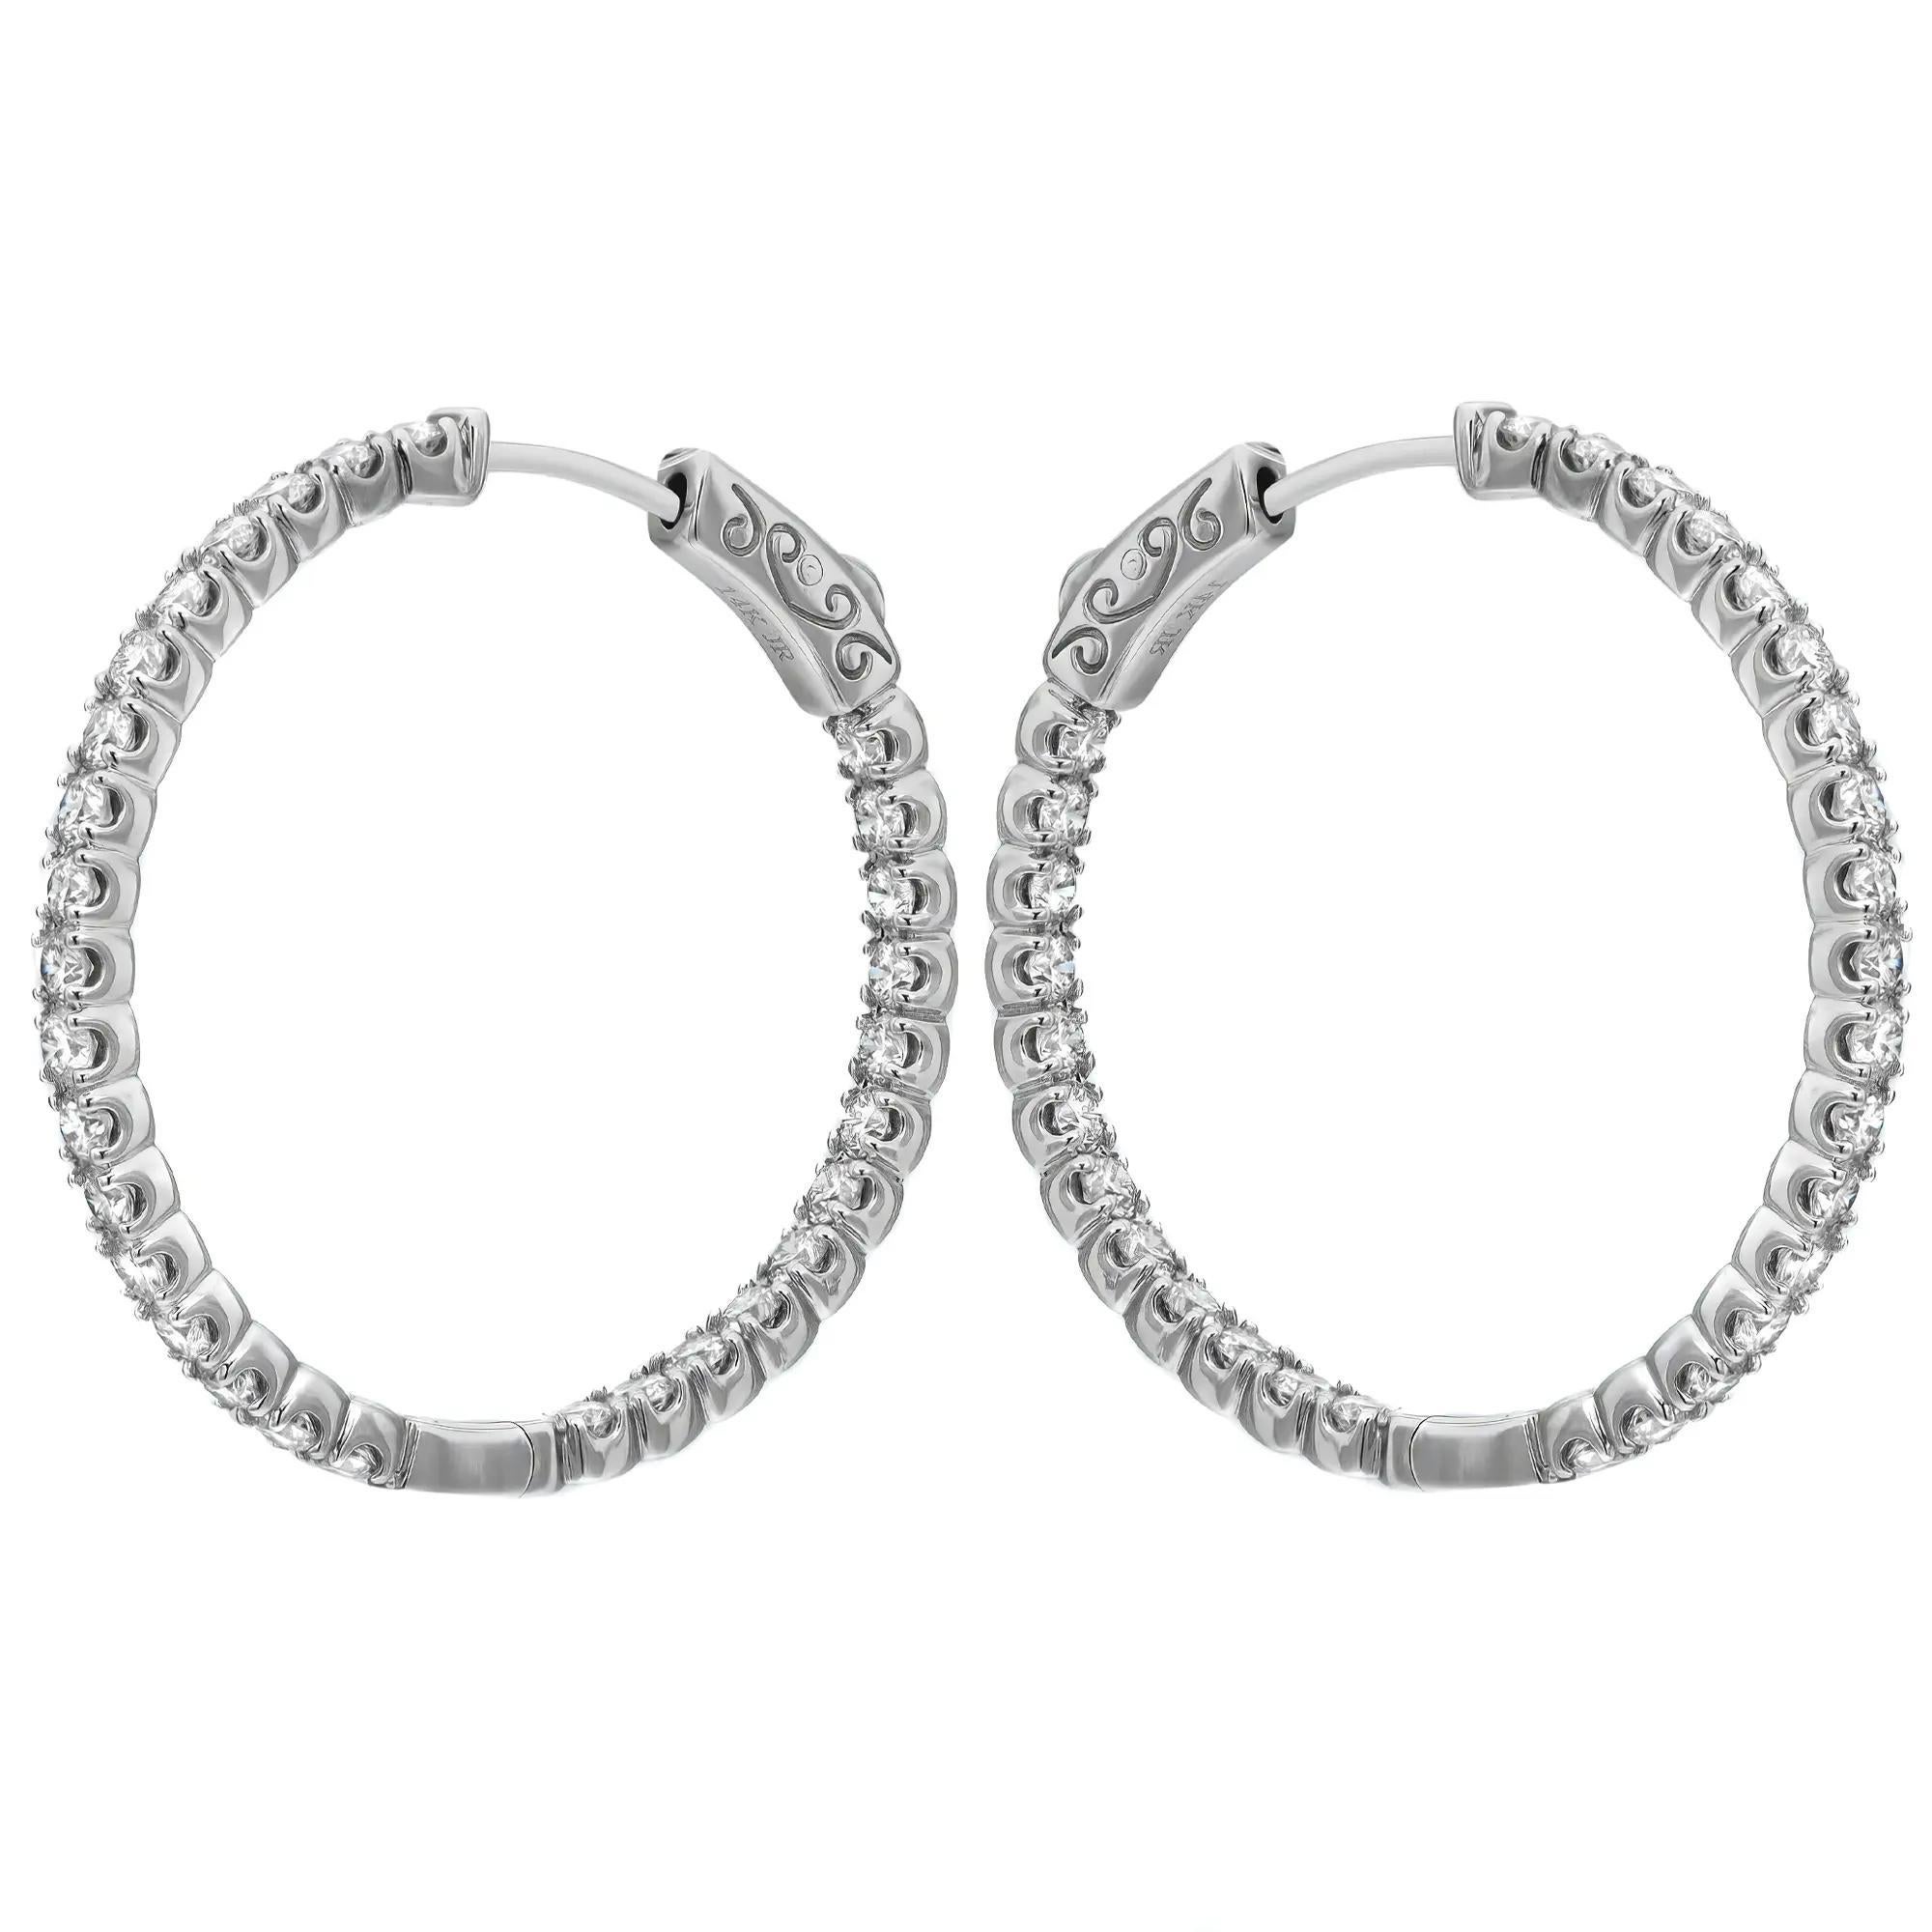 Elevate any attire with these dazzling diamond hoop earrings. Crafted in 14K white gold, each earring sparkles from every angle with a row of glistening diamonds studded inside and outside of the hoop. Total diamond weight: 2.35 carats. Each diamond